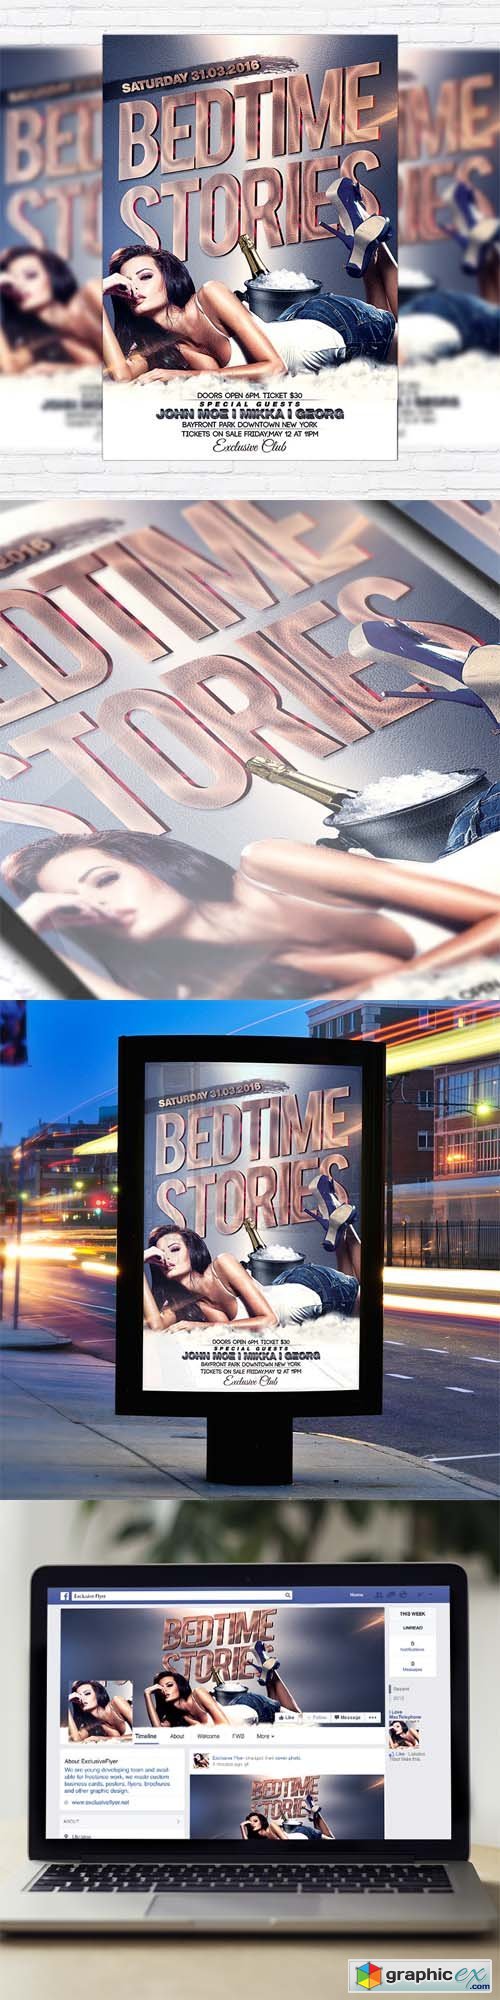 Bedtime Stories - Flyer Template + Facebook Cover